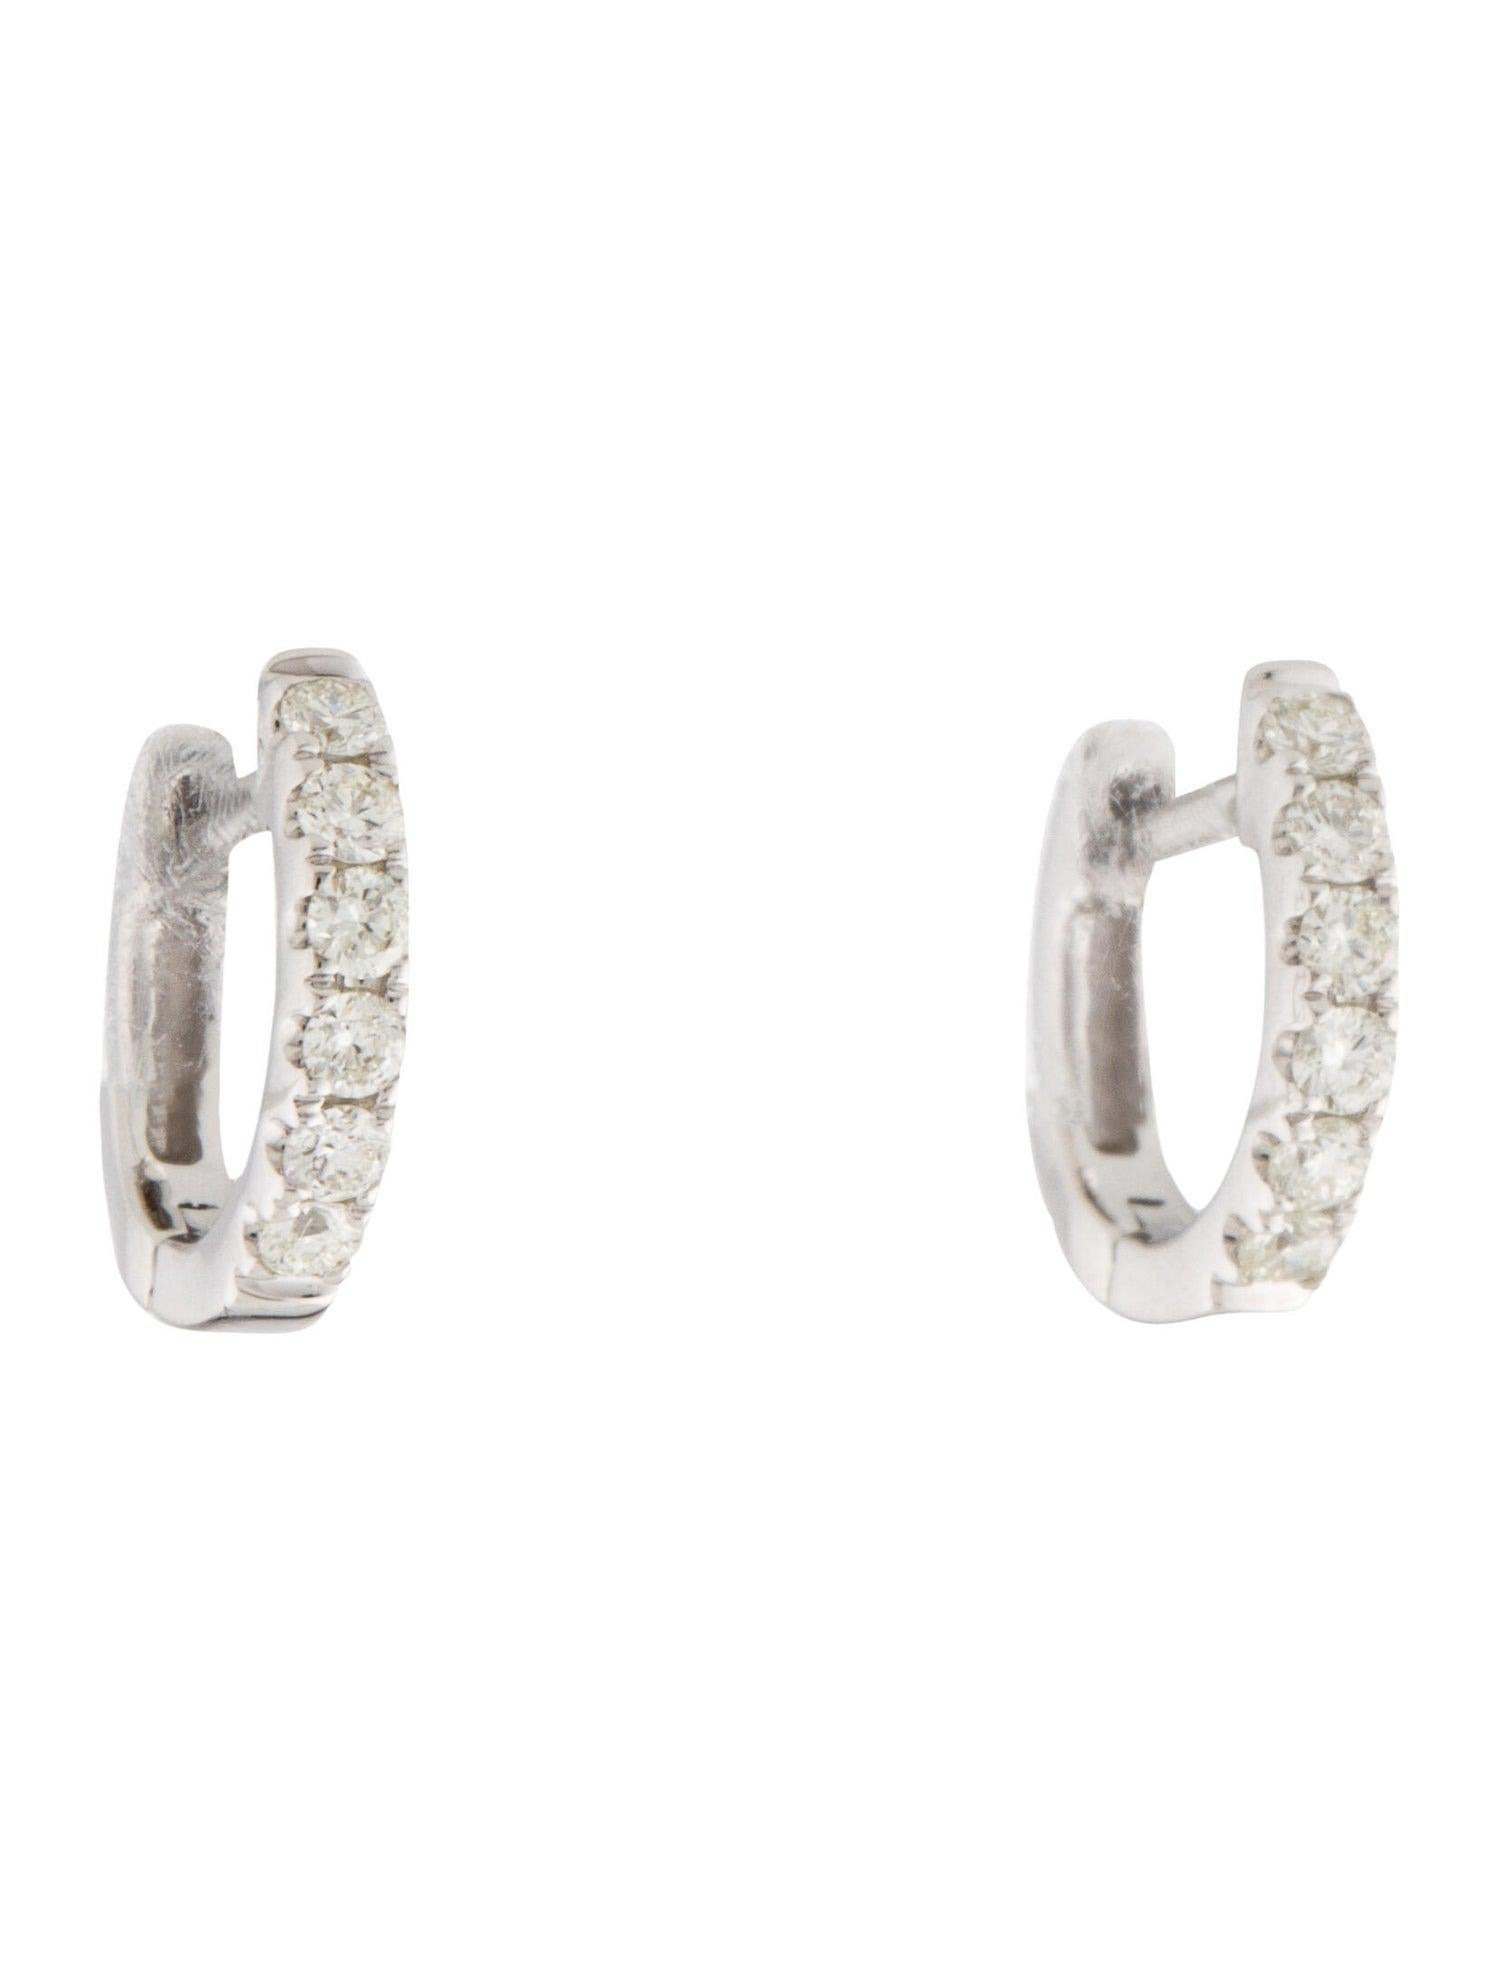 Simple yet stunning, these Diamond huggie hoops are crafted from 14k gold with 13 glittering white 0.18 ct. of diamonds. Each delicate U-shaped hoop features a single line of white diamonds, pave-set across the face in a gorgeous display.
-14K